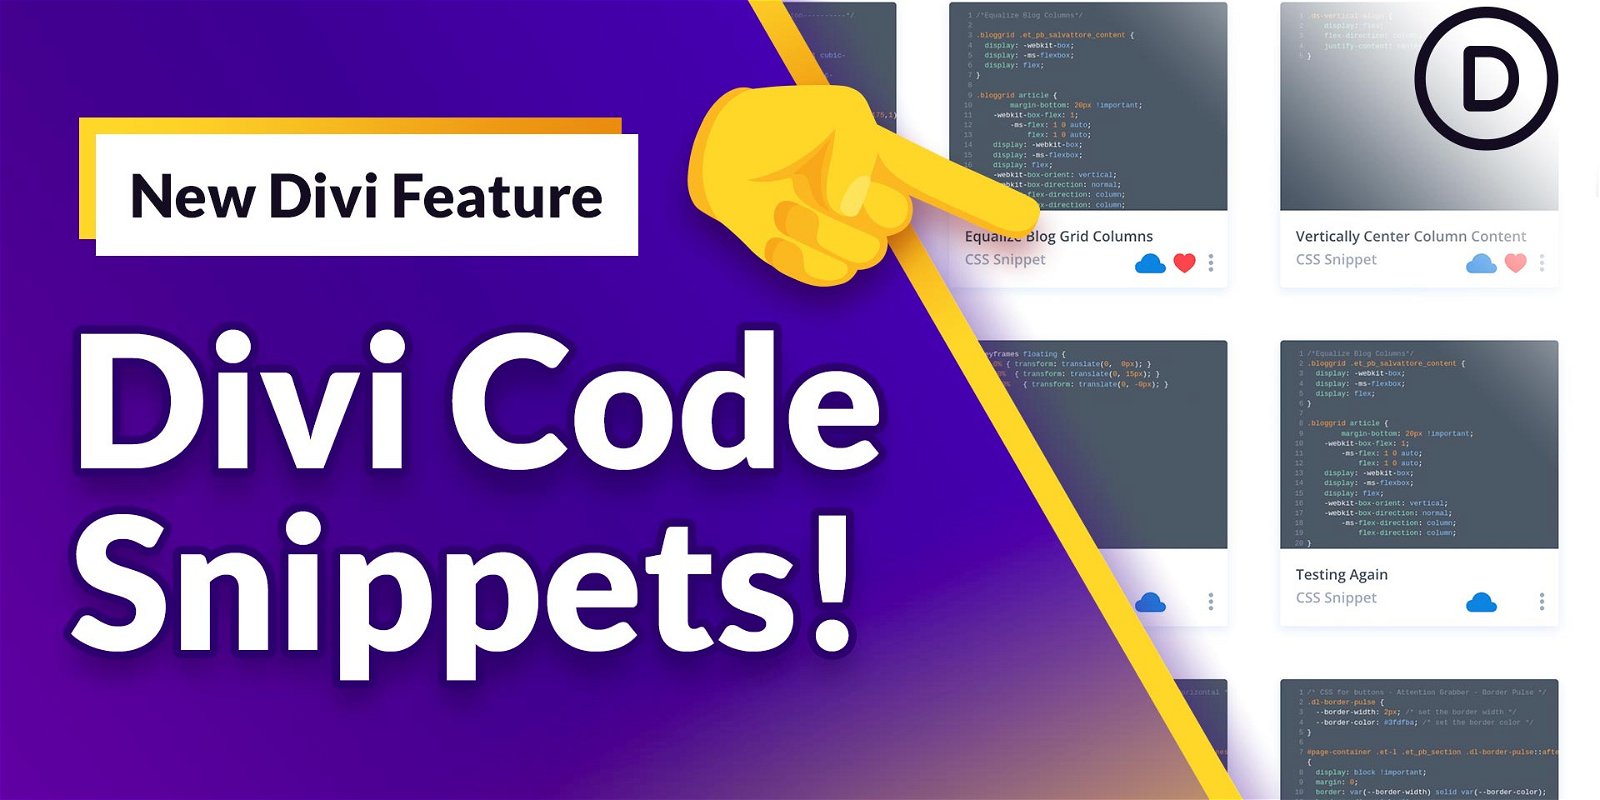 Divi Code Snippets